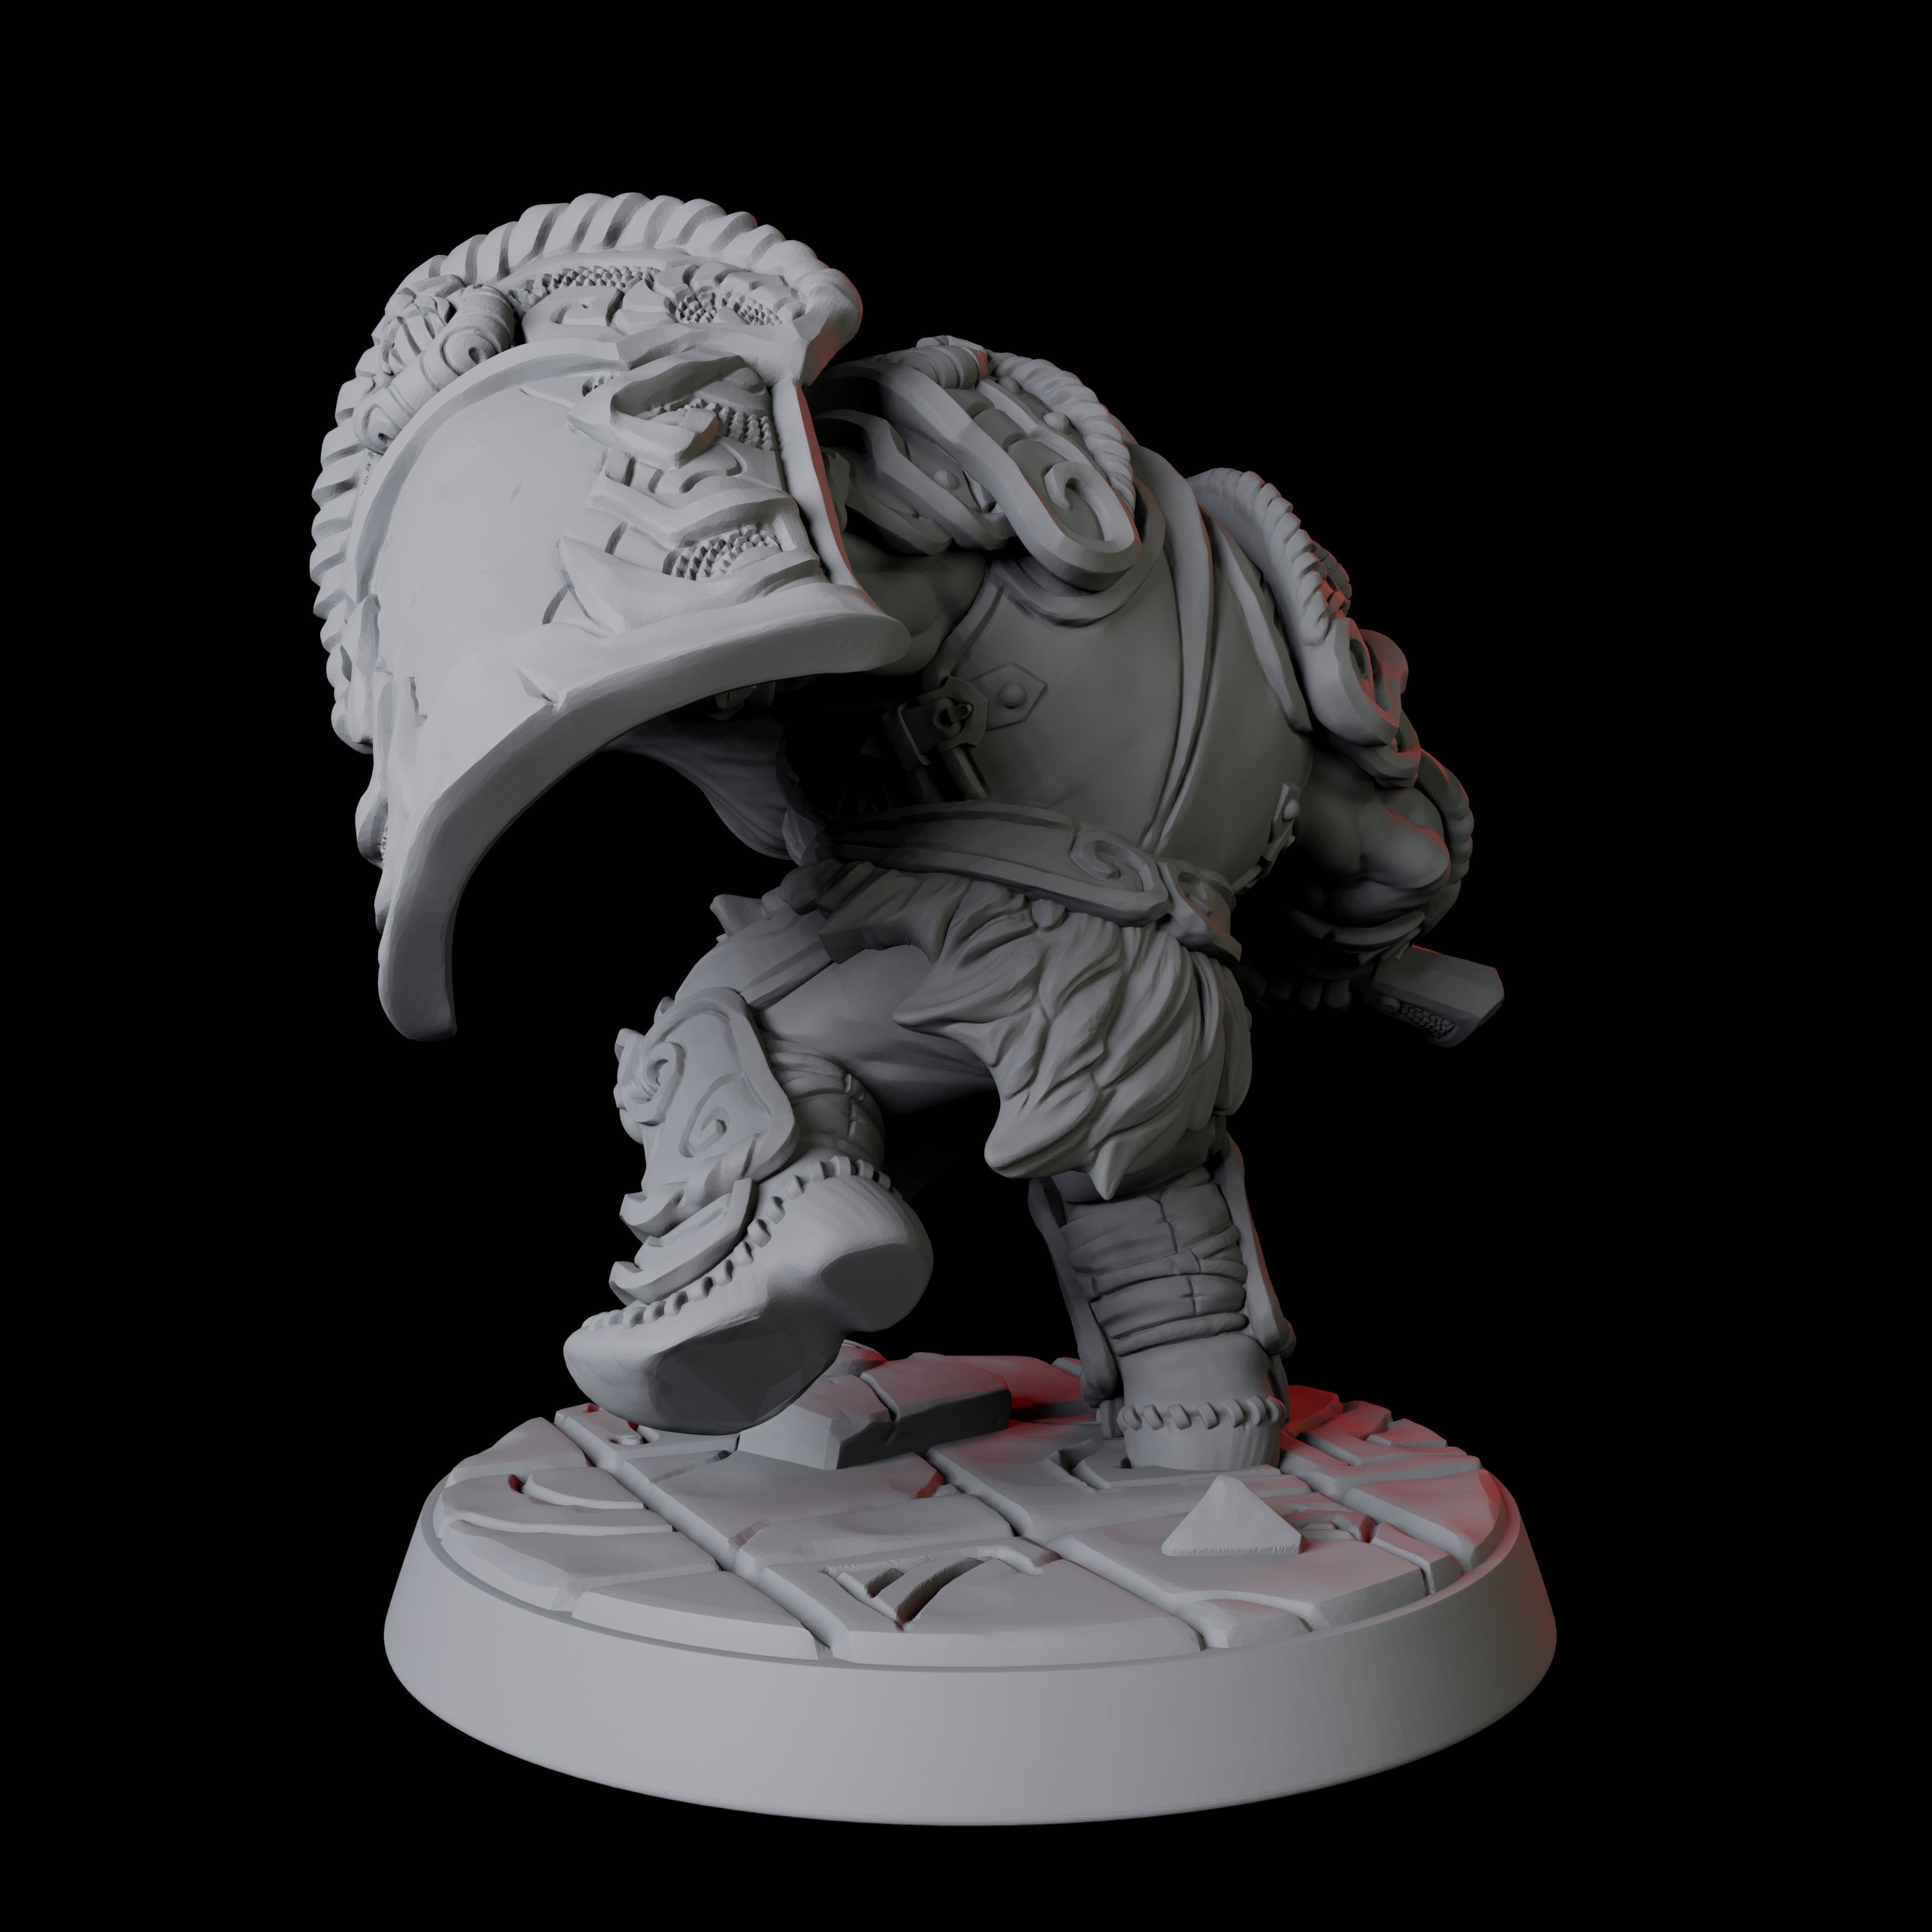 City Guard Dwarf A Miniature for Dungeons and Dragons, Pathfinder or other TTRPGs